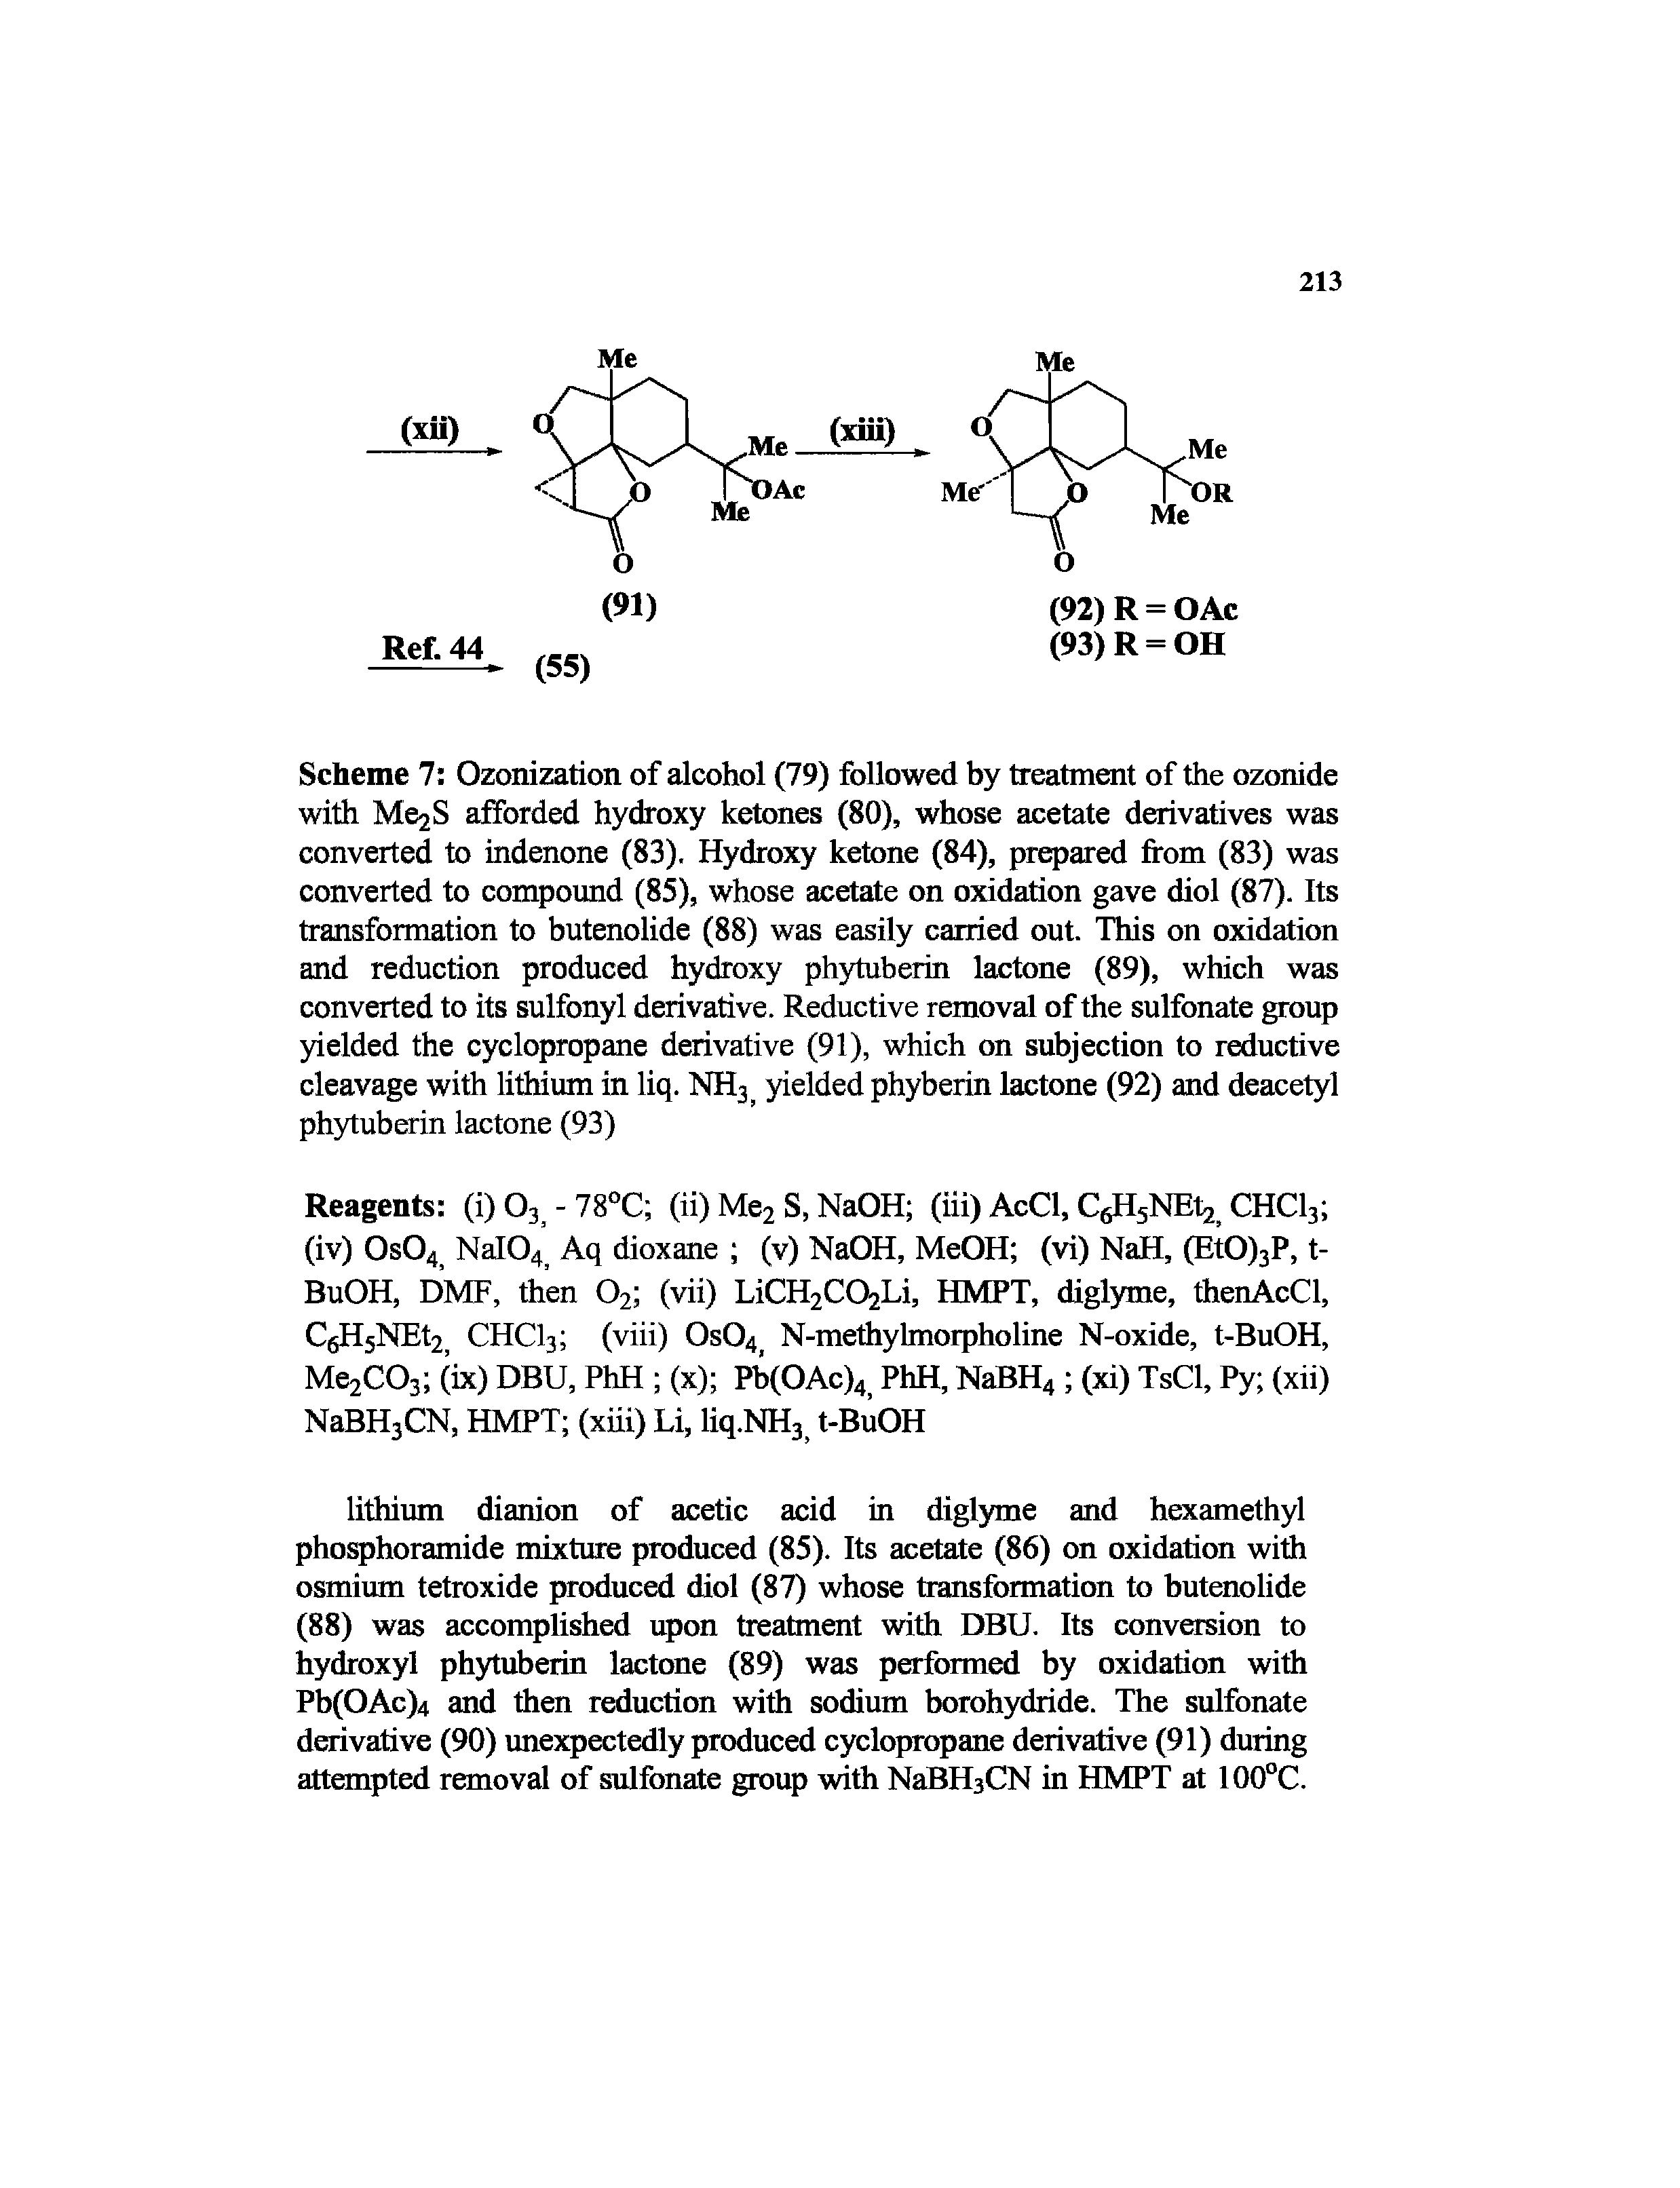 Scheme 7 Ozonization of alcohol (79) followed by treatment of the ozonide with Me2S afforded hydroxy ketones (80), whose acetate derivatives was converted to indenone (83). Hydroxy ketone (84), prepared from (83) was converted to compound (85), whose acetate on oxidation gave diol (87). Its transformation to butenolide (88) was easily carried out. This on oxidation and reduction produced hydroxy phytuberin lactone (89), which was converted to its sulfonyl derivative. Reductive removal of the sulfonate group yielded the cyclopropane derivative (91), which on subjection to reductive cleavage with lithium in liq. NH3 yielded phyberin lactone (92) and deacetyl phytuberin lactone (93)...